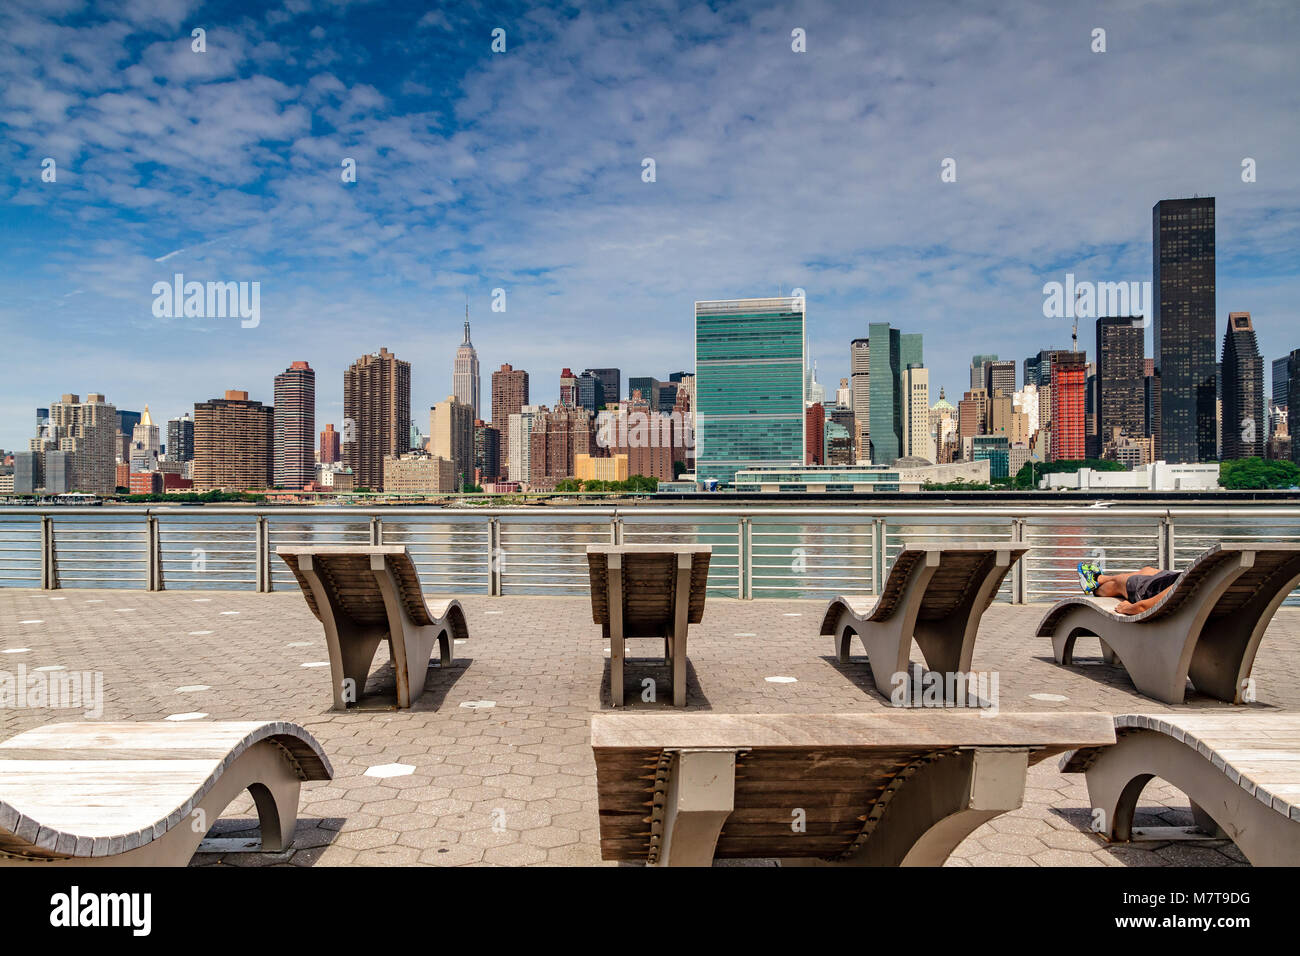 Midtown Manhattan and The United Nations Building seen from across The East River at Gantry Plaza State Park in Long Island City ,Queens, New York Stock Photo